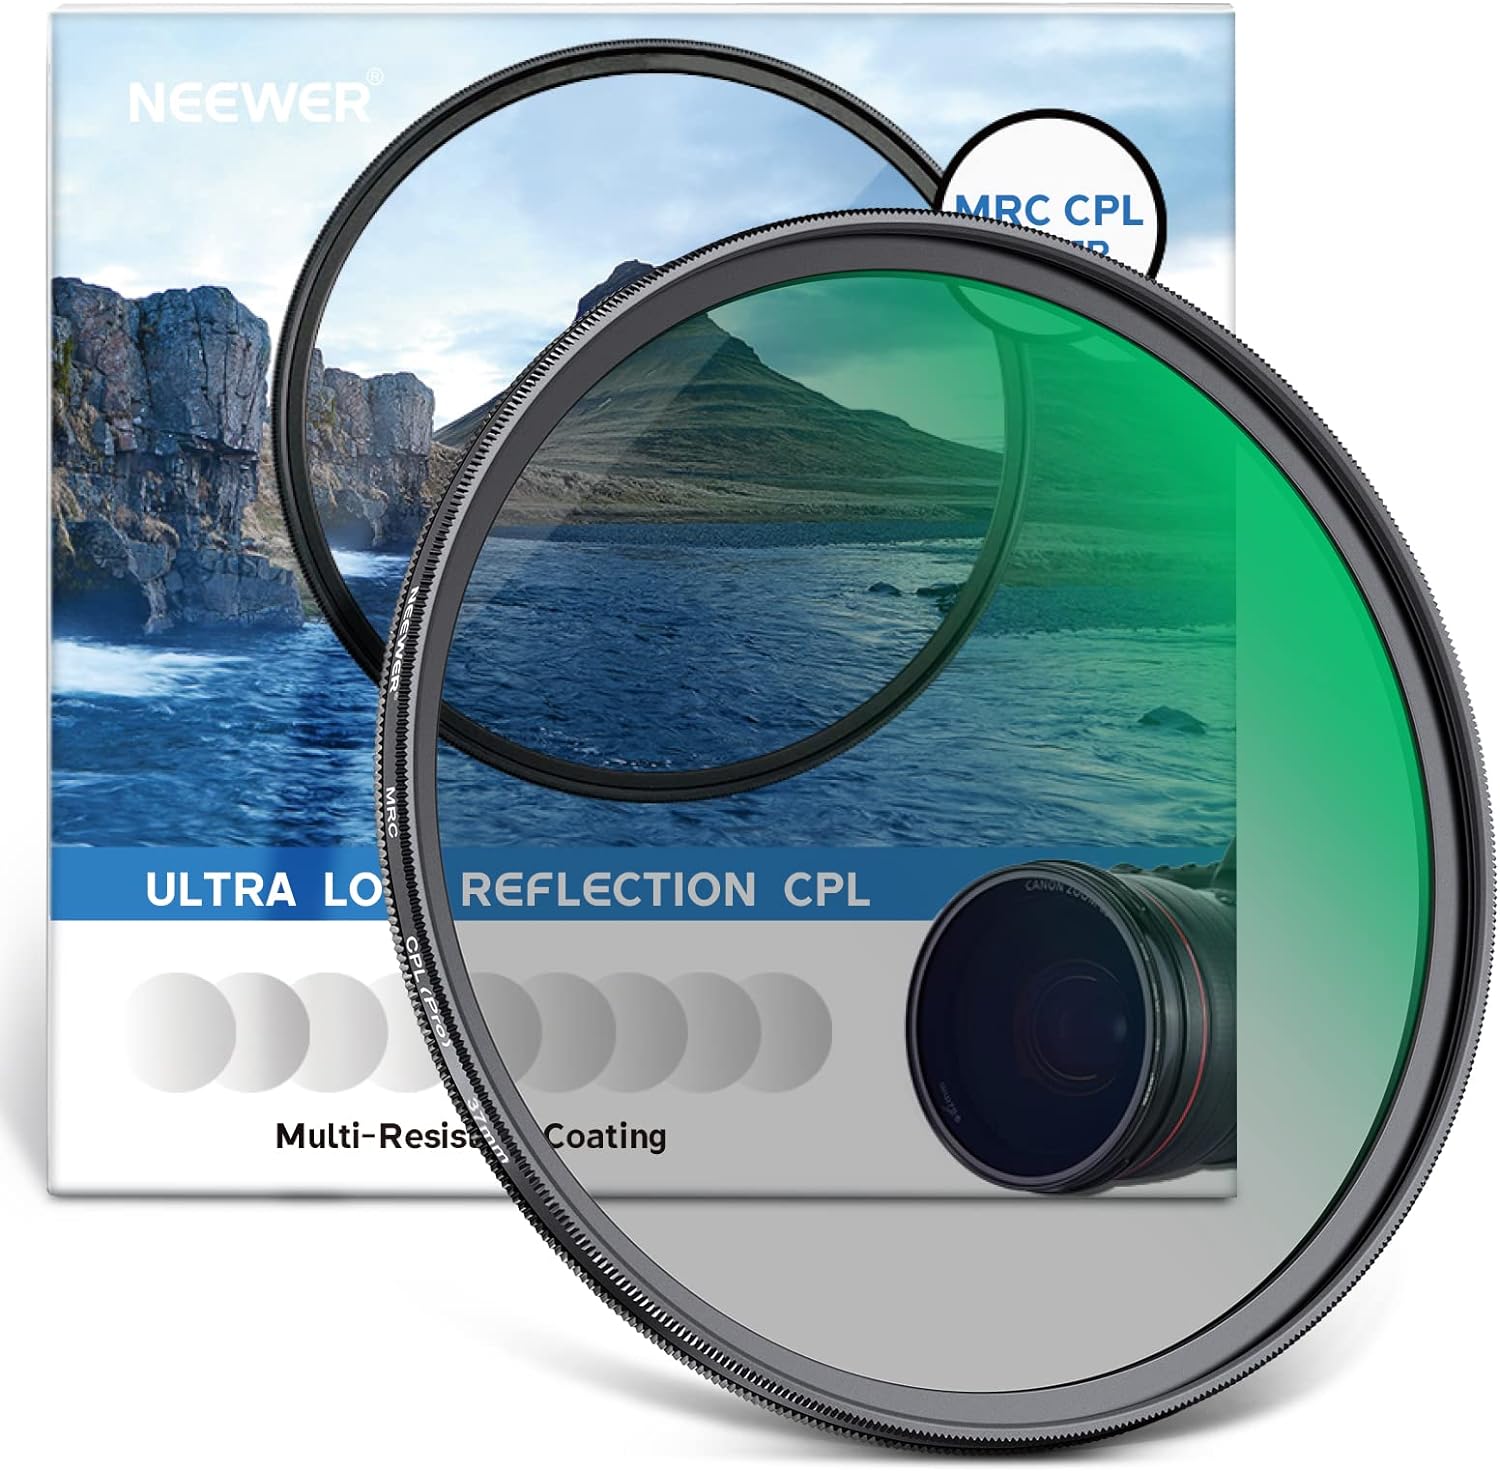 Types Of Polarizer Filters